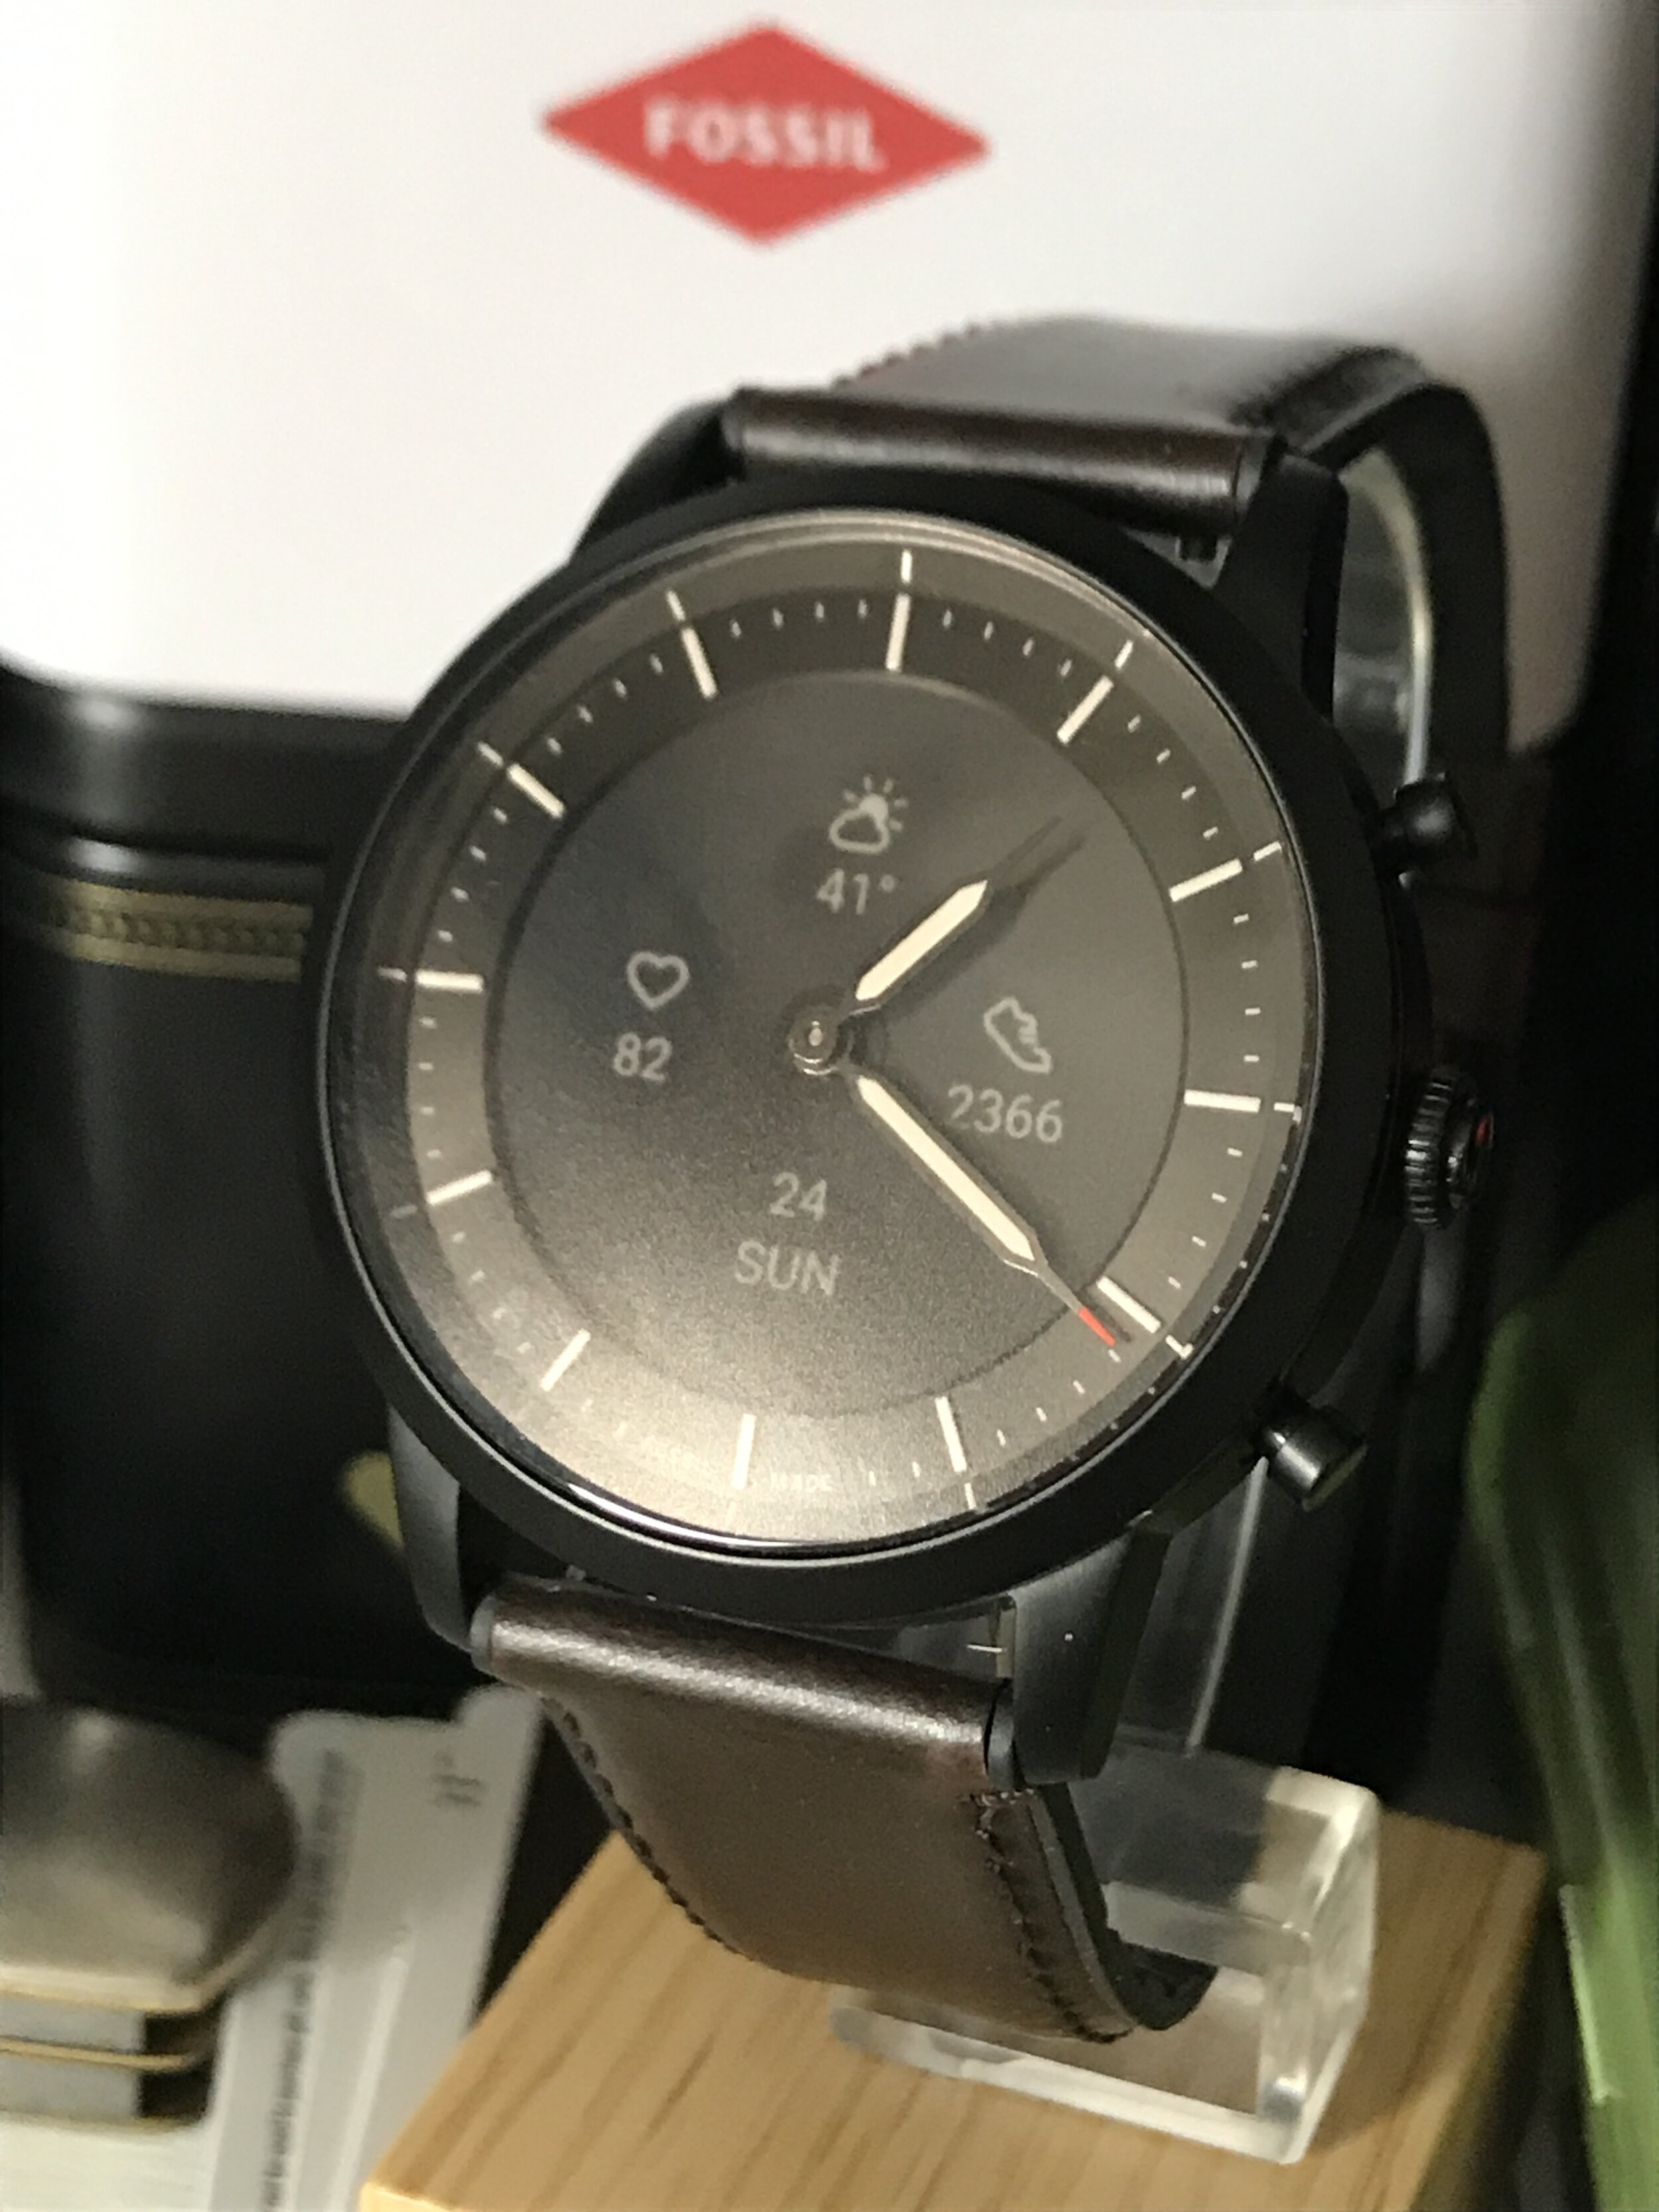 A review of the Fossil HR Collider Hybrid - FTW7008 — Underground Fossil  Collectors Club